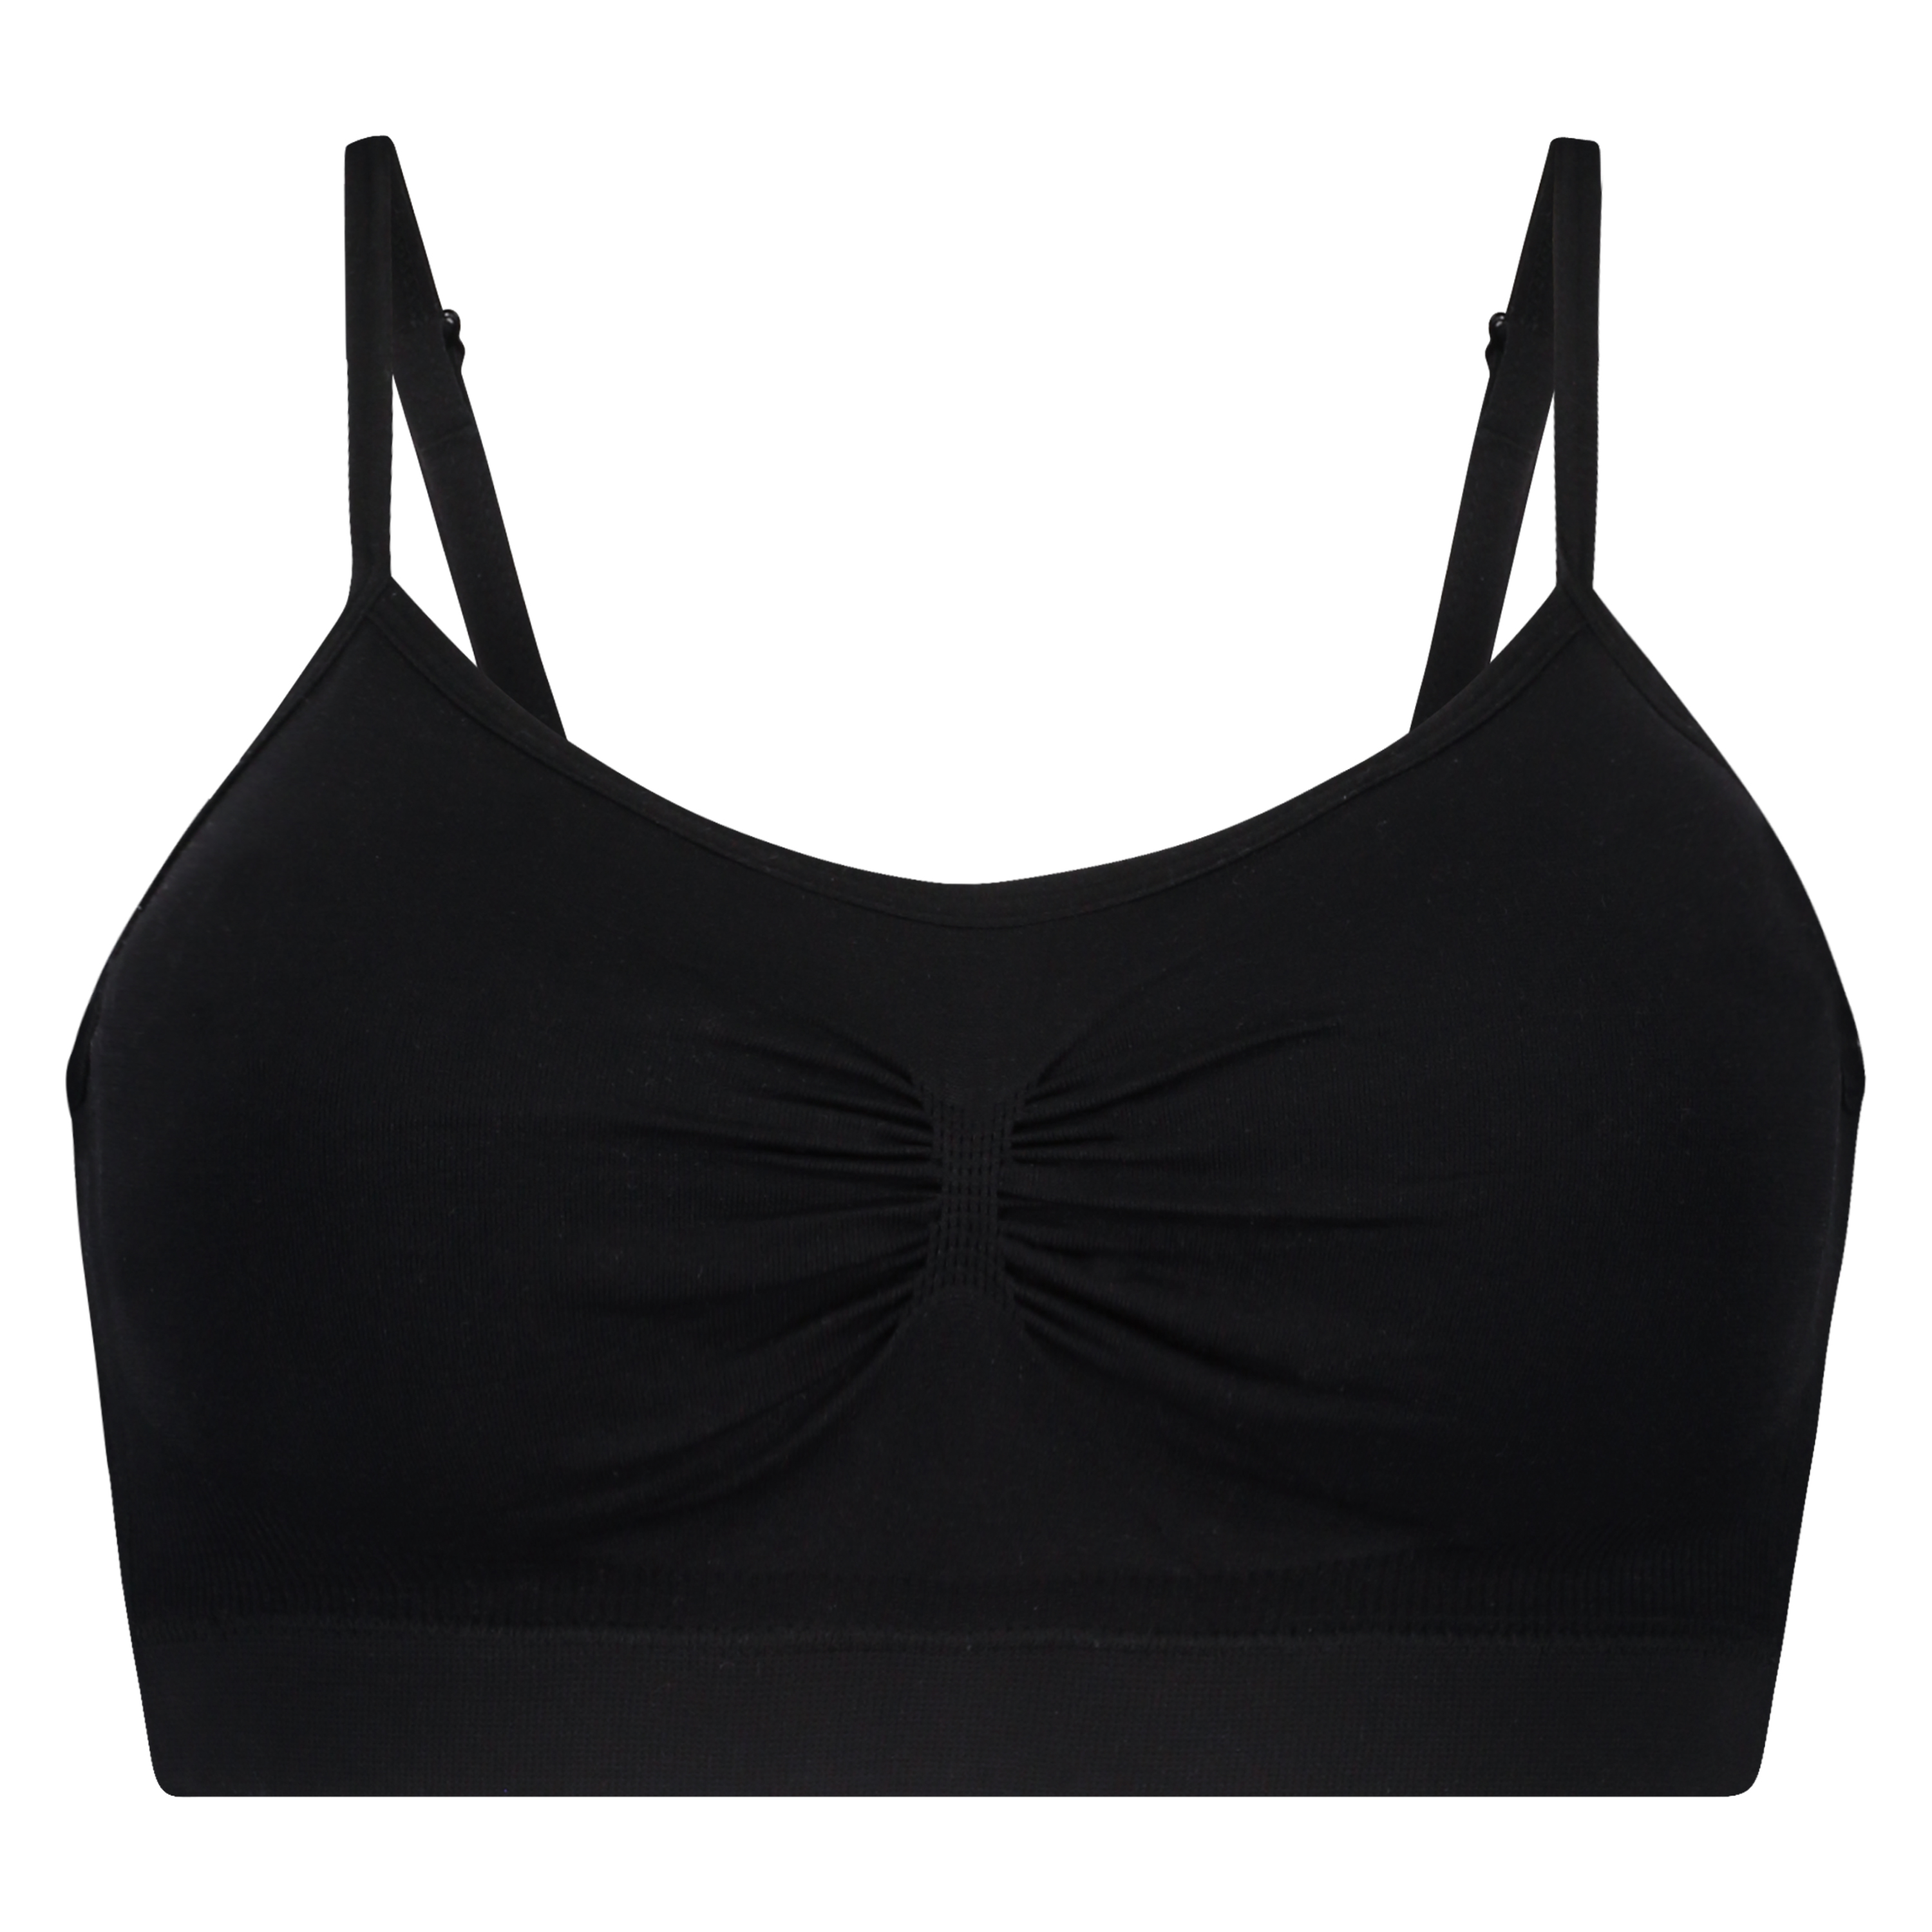 Seamless strappy top for £15.00 - Non-wired Bras - Hunkemöller